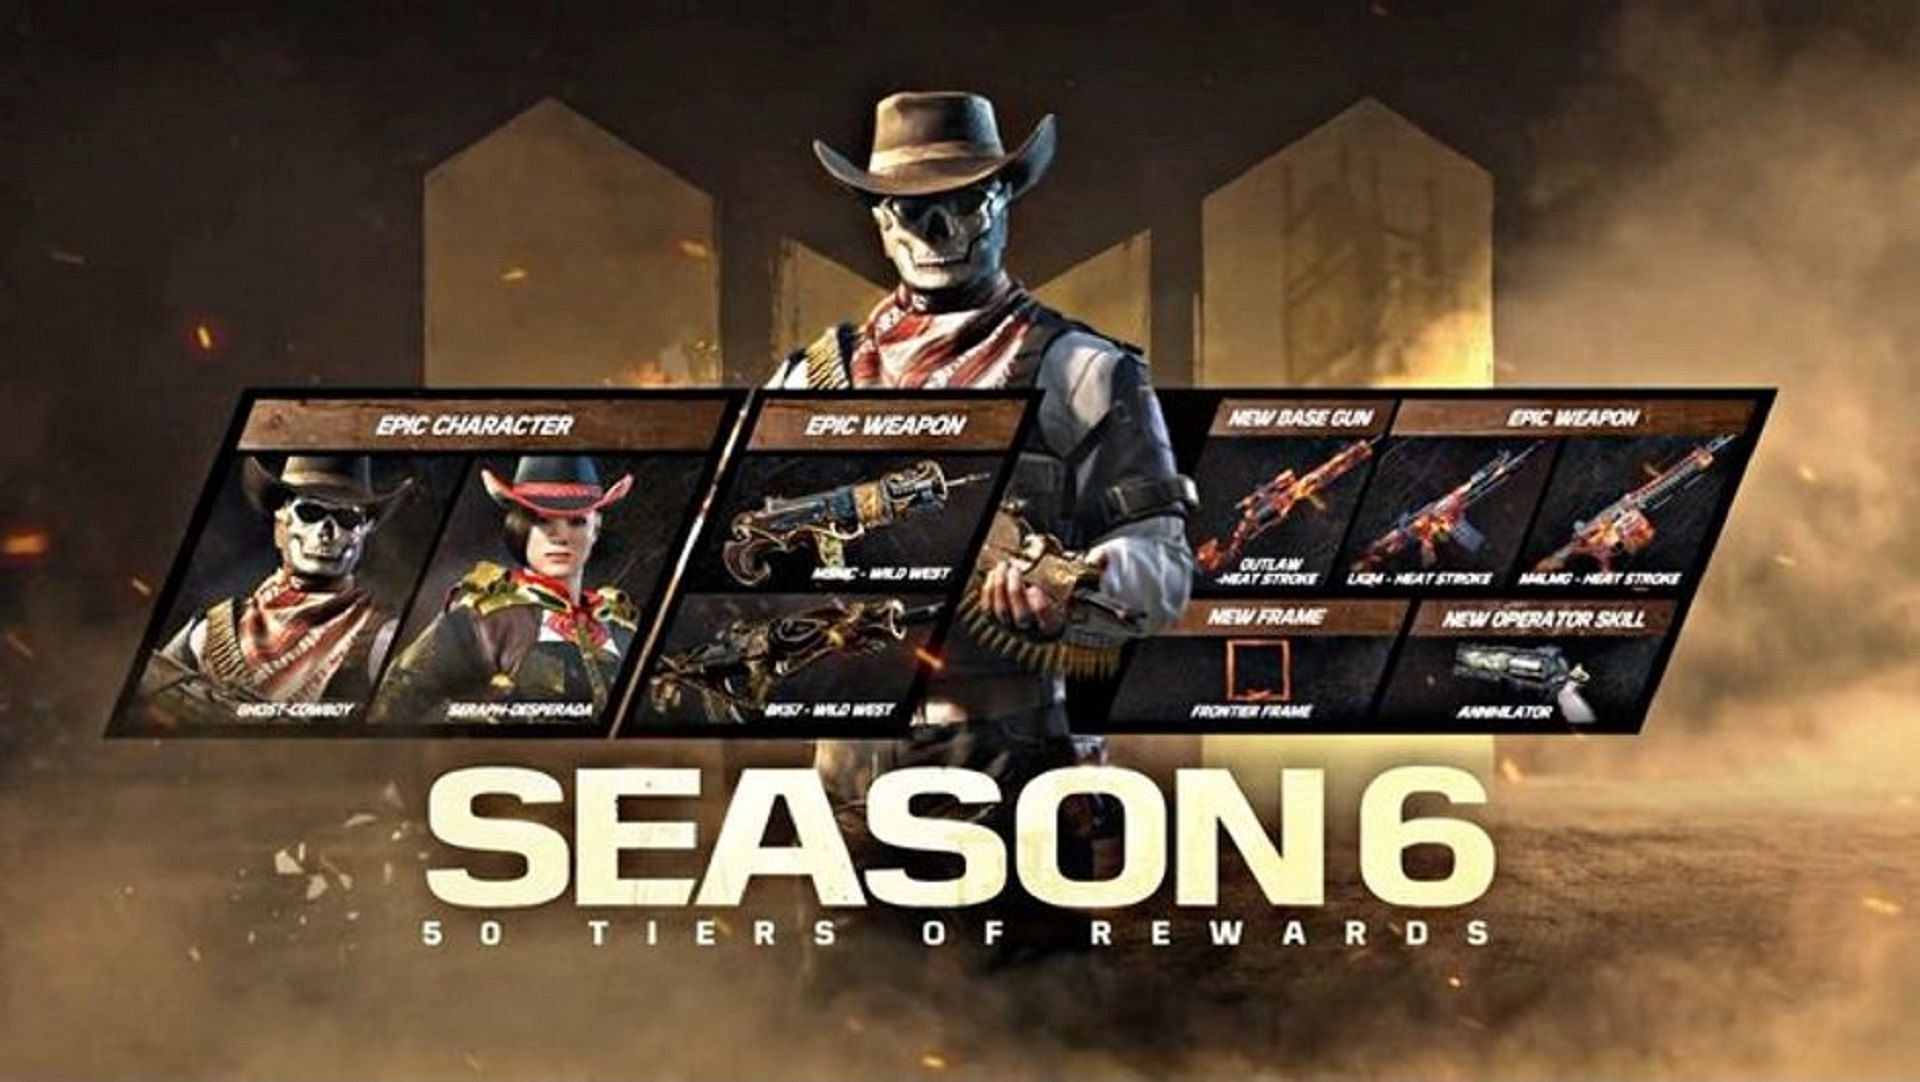 Ghost returns in Season 6 with a western-styled skin (Image via Activision)